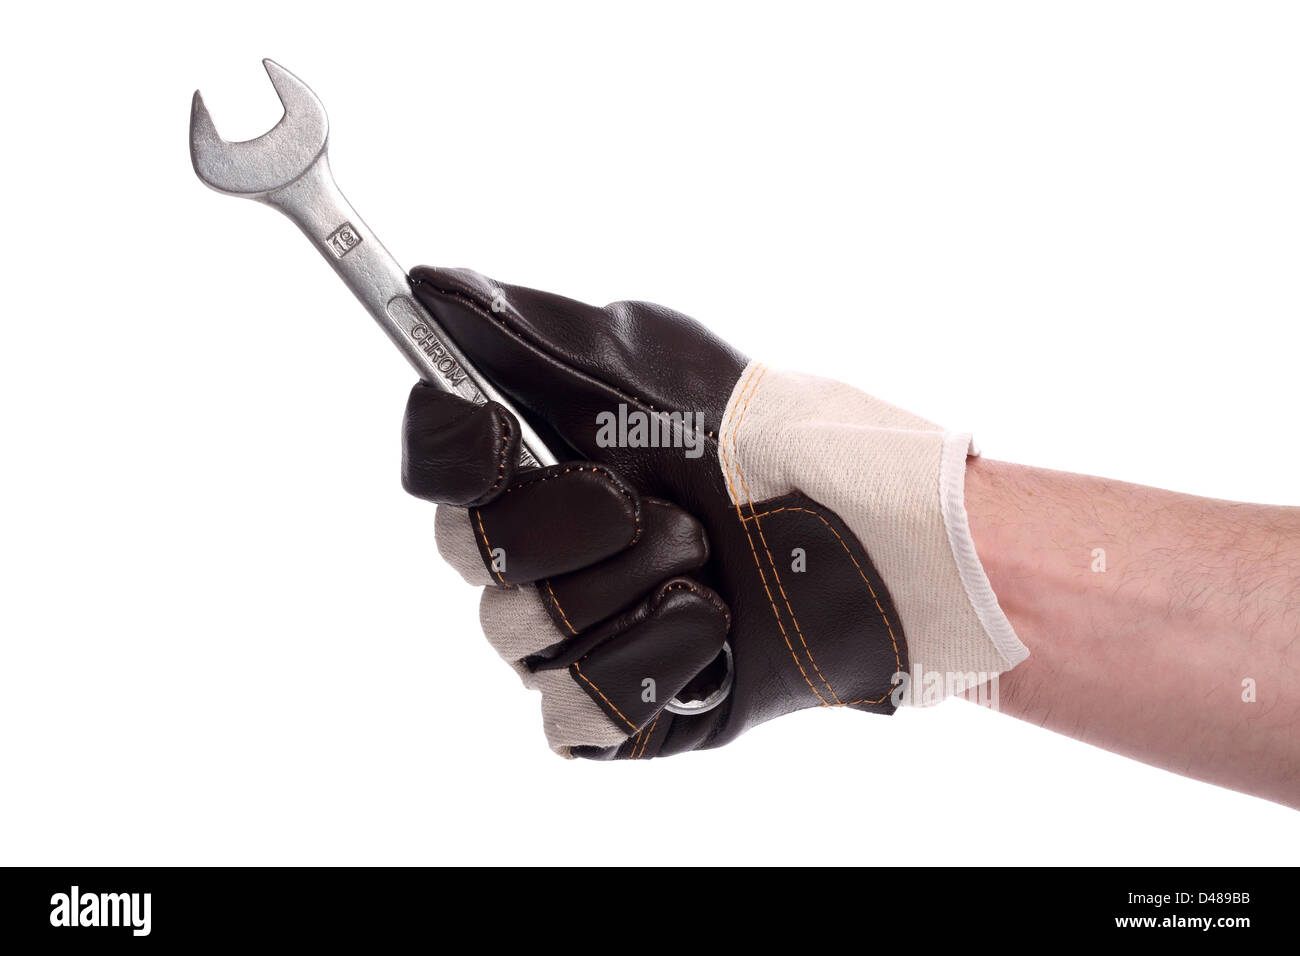 a wrench in a hand with working glove. Stock Photo